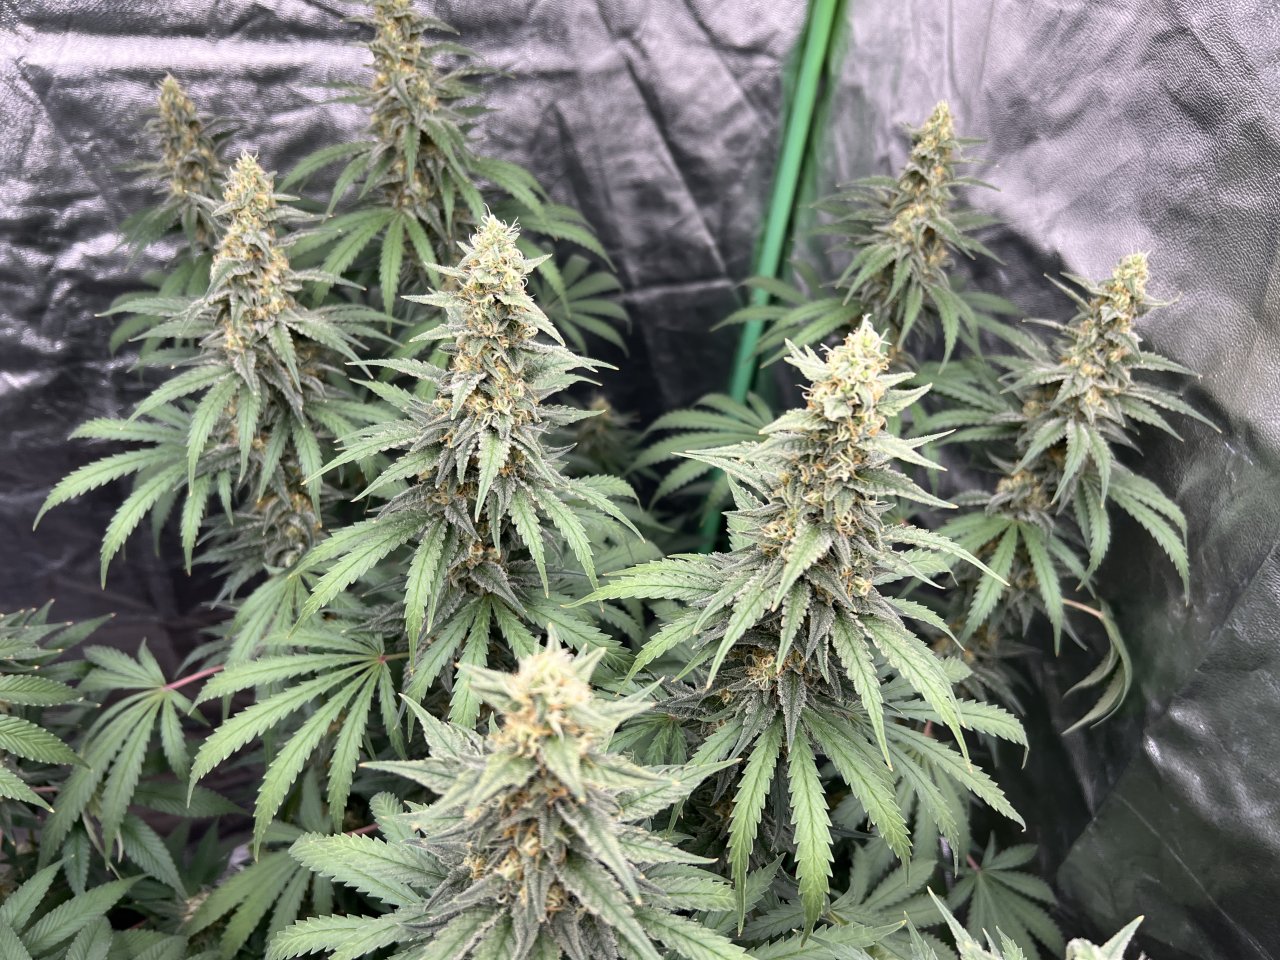 Watermelon canopy 76 and day 38 of flower